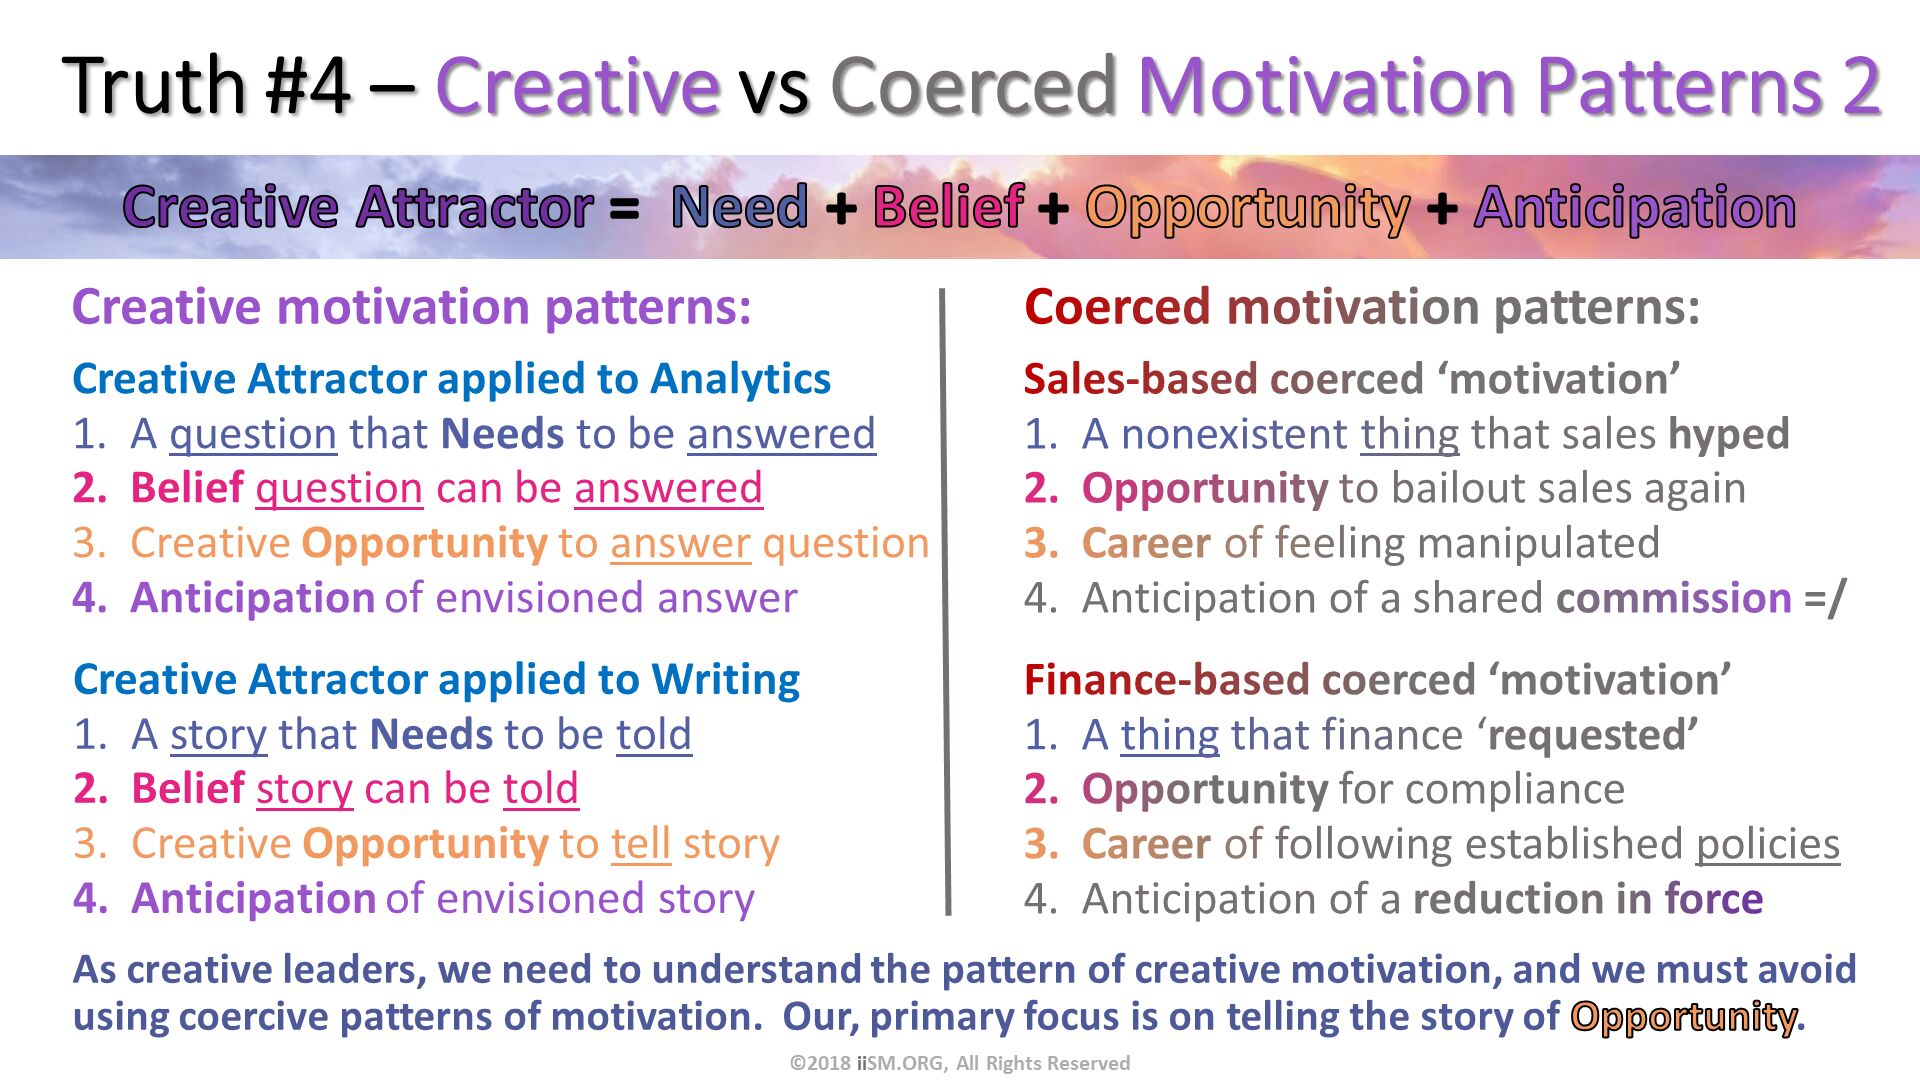 Truth #4 – Creative vs Coerced Motivation Patterns 2. Sales-based coerced ‘motivation’
A nonexistent thing that sales hyped
Opportunity to bailout sales again 
Career of feeling manipulated
Anticipation of a shared commission =/. Finance-based coerced ‘motivation’
A thing that finance ‘requested’
Opportunity for compliance
Career of following established policies
Anticipation of a reduction in force. Creative motivation patterns:. ©2018 iiSM.ORG, All Rights Reserved. Coerced motivation patterns:. Creative Attractor applied to Analytics
A question that Needs to be answered
Belief question can be answered
Creative Opportunity to answer question
Anticipation of envisioned answer. Creative Attractor applied to Writing
A story that Needs to be told
Belief story can be told
Creative Opportunity to tell story
Anticipation of envisioned story. As creative leaders, we need to understand the pattern of creative motivation, and we must avoid using coercive patterns of motivation.  Our, primary focus is on telling the story of Opportunity. 